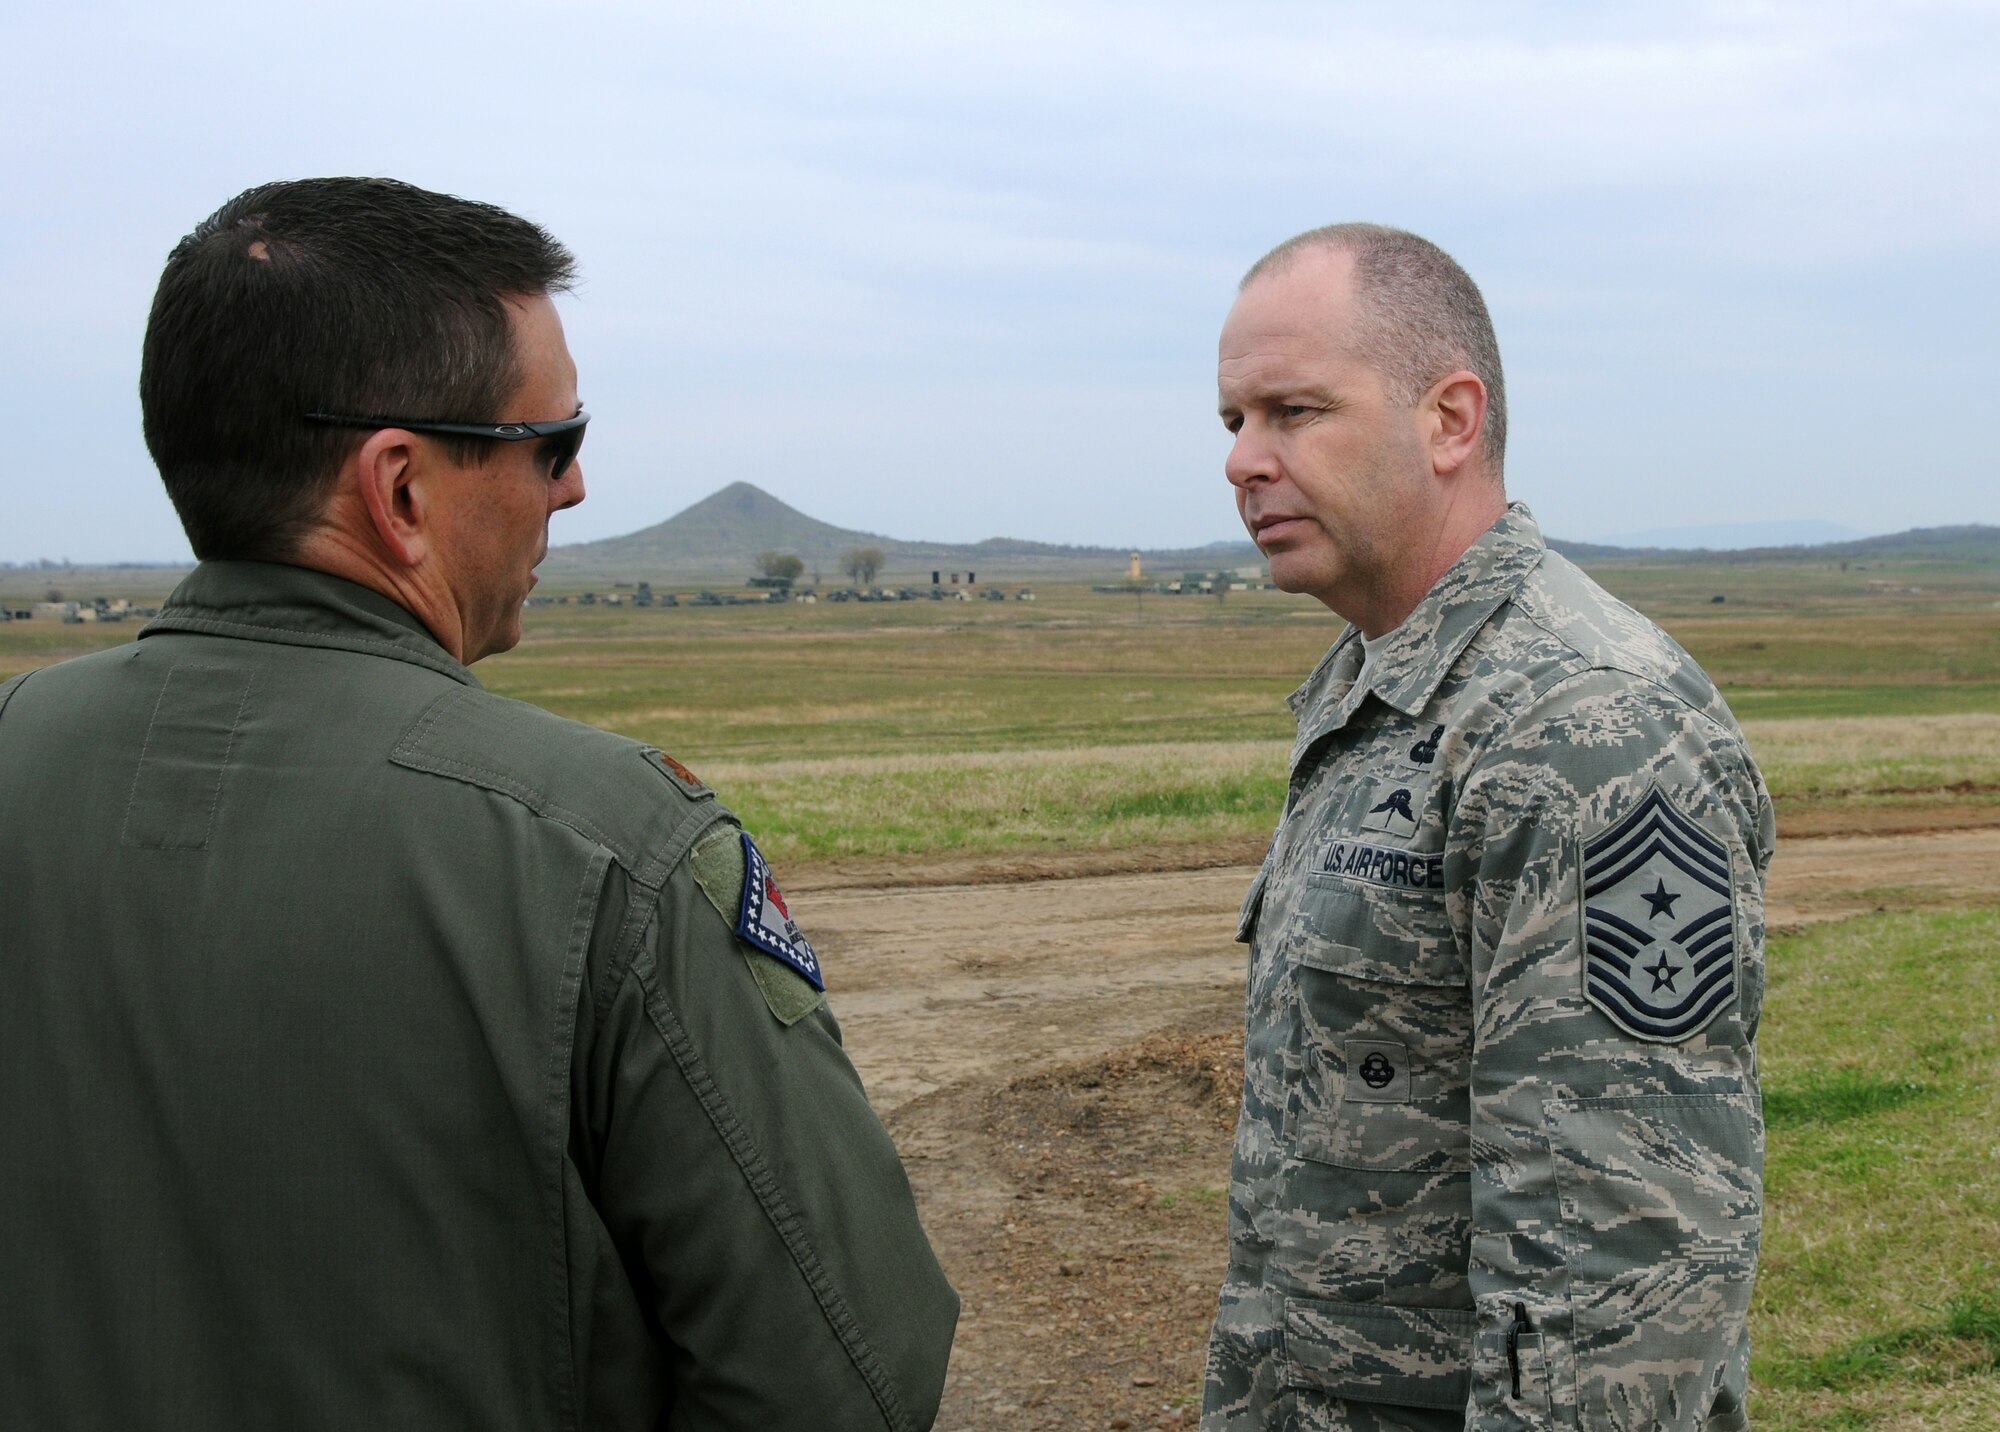 Air National Guard Command Chief Master Sgt. James W. Hotaling speaks with Maj. Doug Davis, 188th Fighter Wing Detachment 1 Razorback Range commander, during his visit to the 188th Fighter Wing April 5, 2014. Hotaling spoke with enlisted Airmen across the base about professionalism, resilience and recognition, and observed close air support training at the range. (U.S. Air National Guard photo by Senior Airman John Hillier/released)